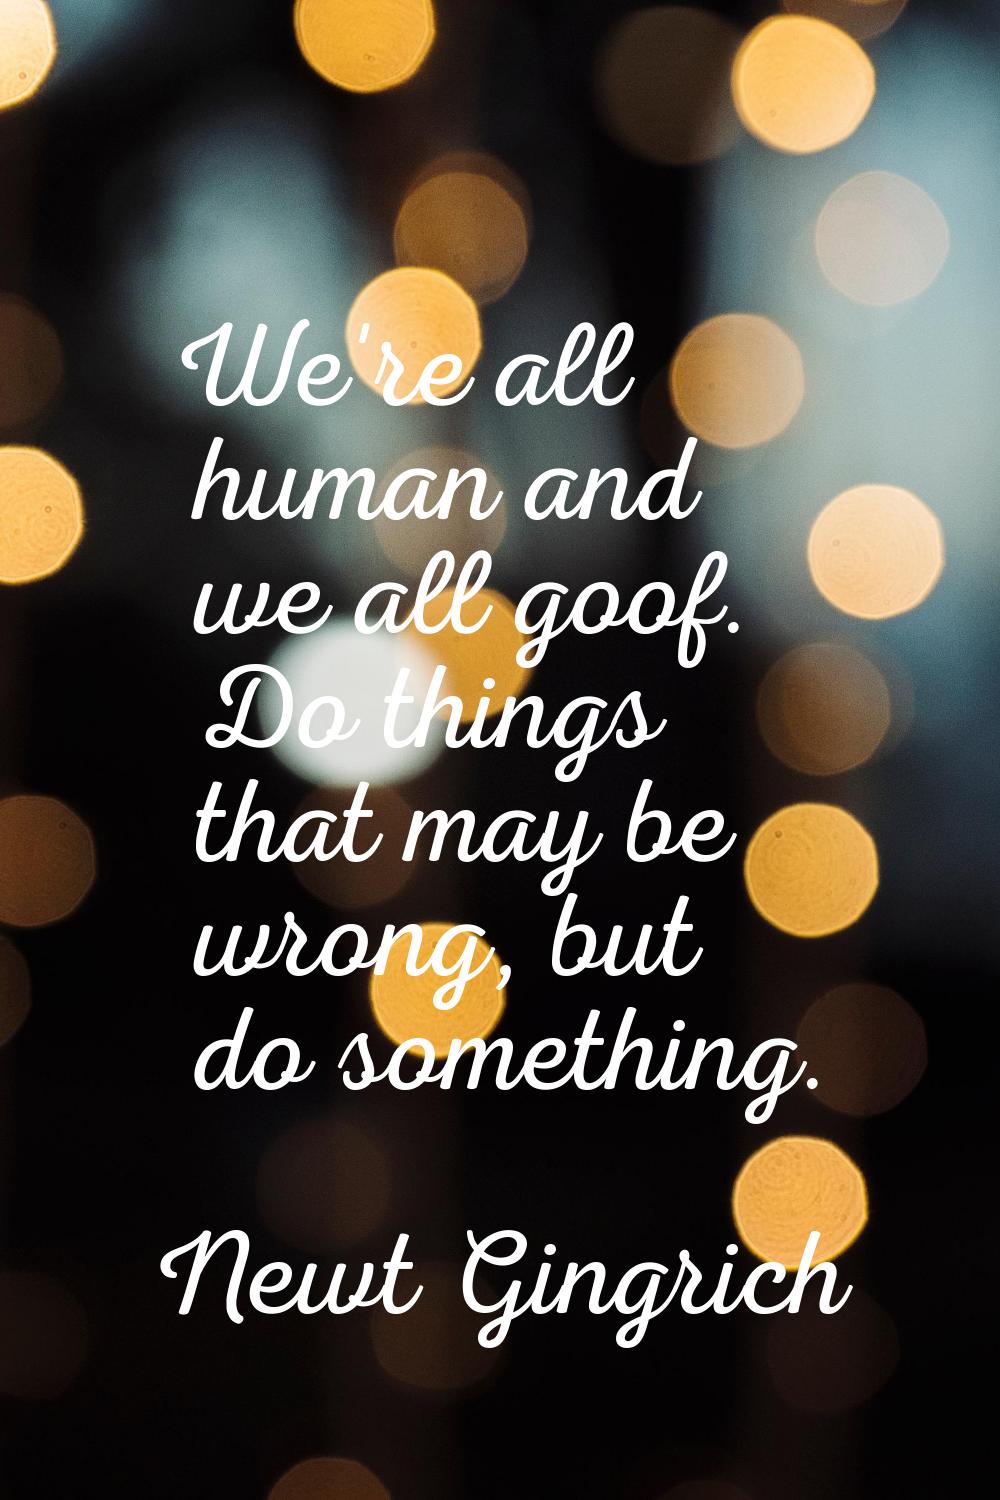 We're all human and we all goof. Do things that may be wrong, but do something.